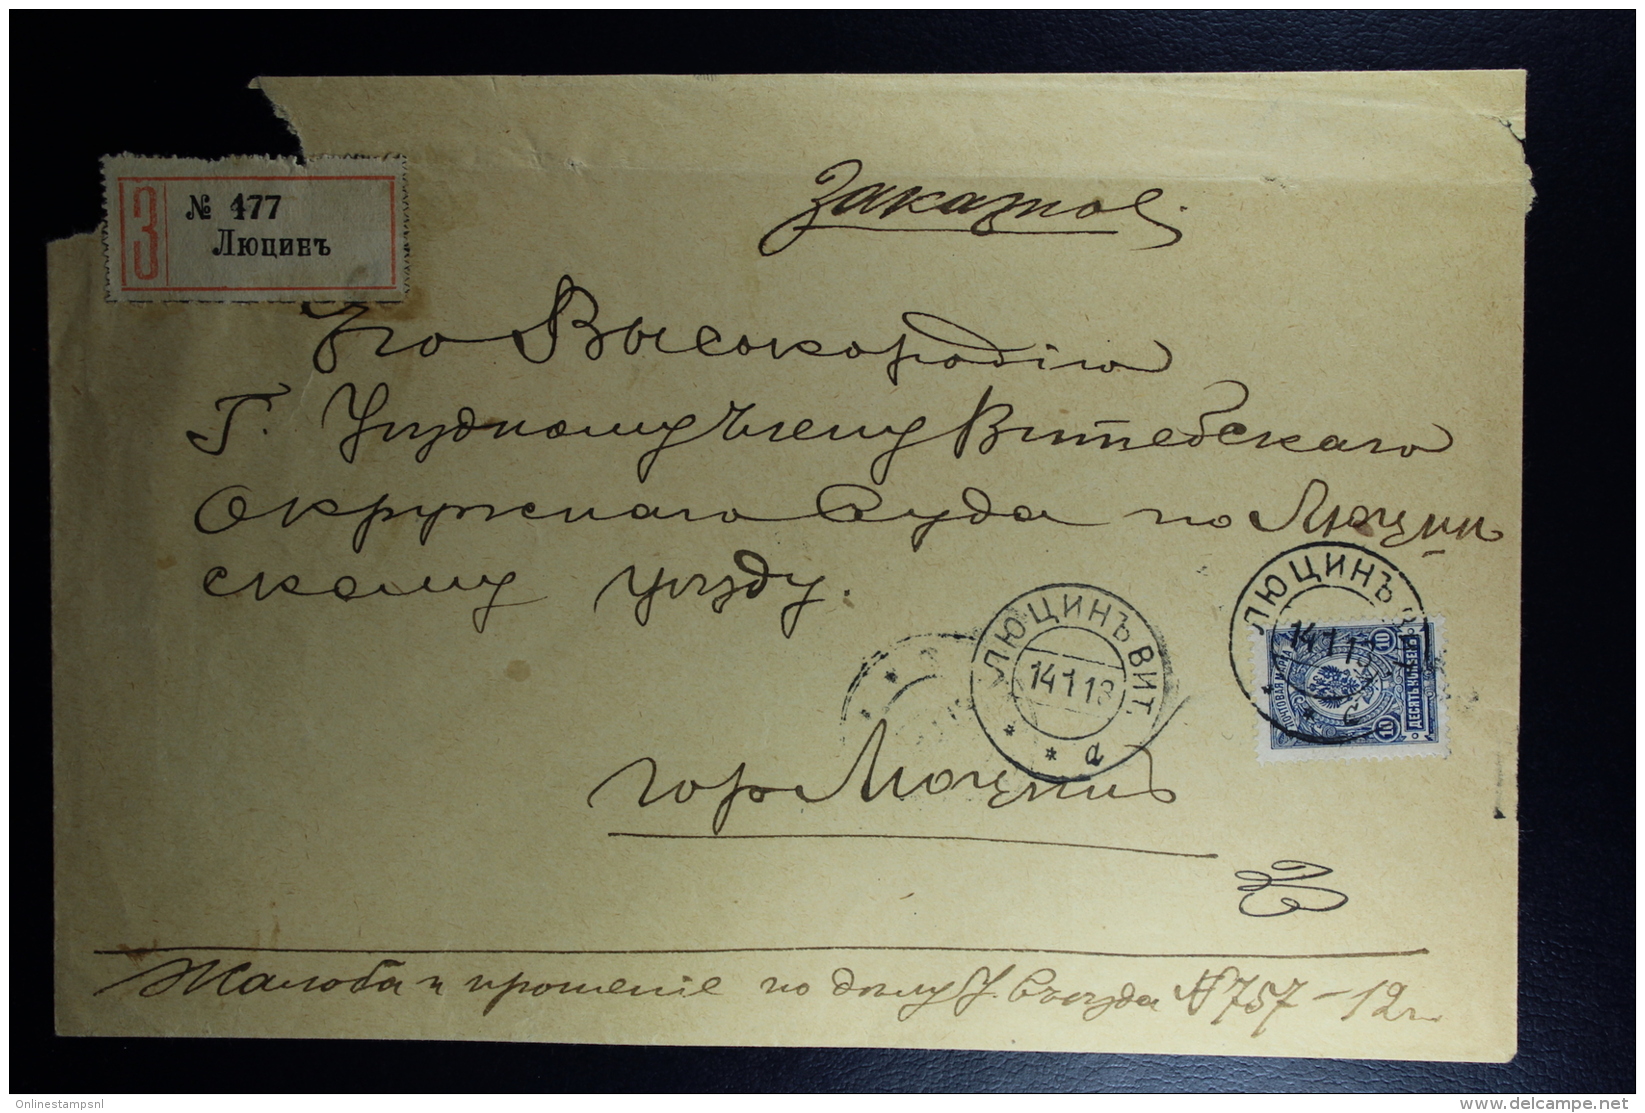 Russian Latvia : Registered Cover 1913 Witebsk Ludsen - Covers & Documents